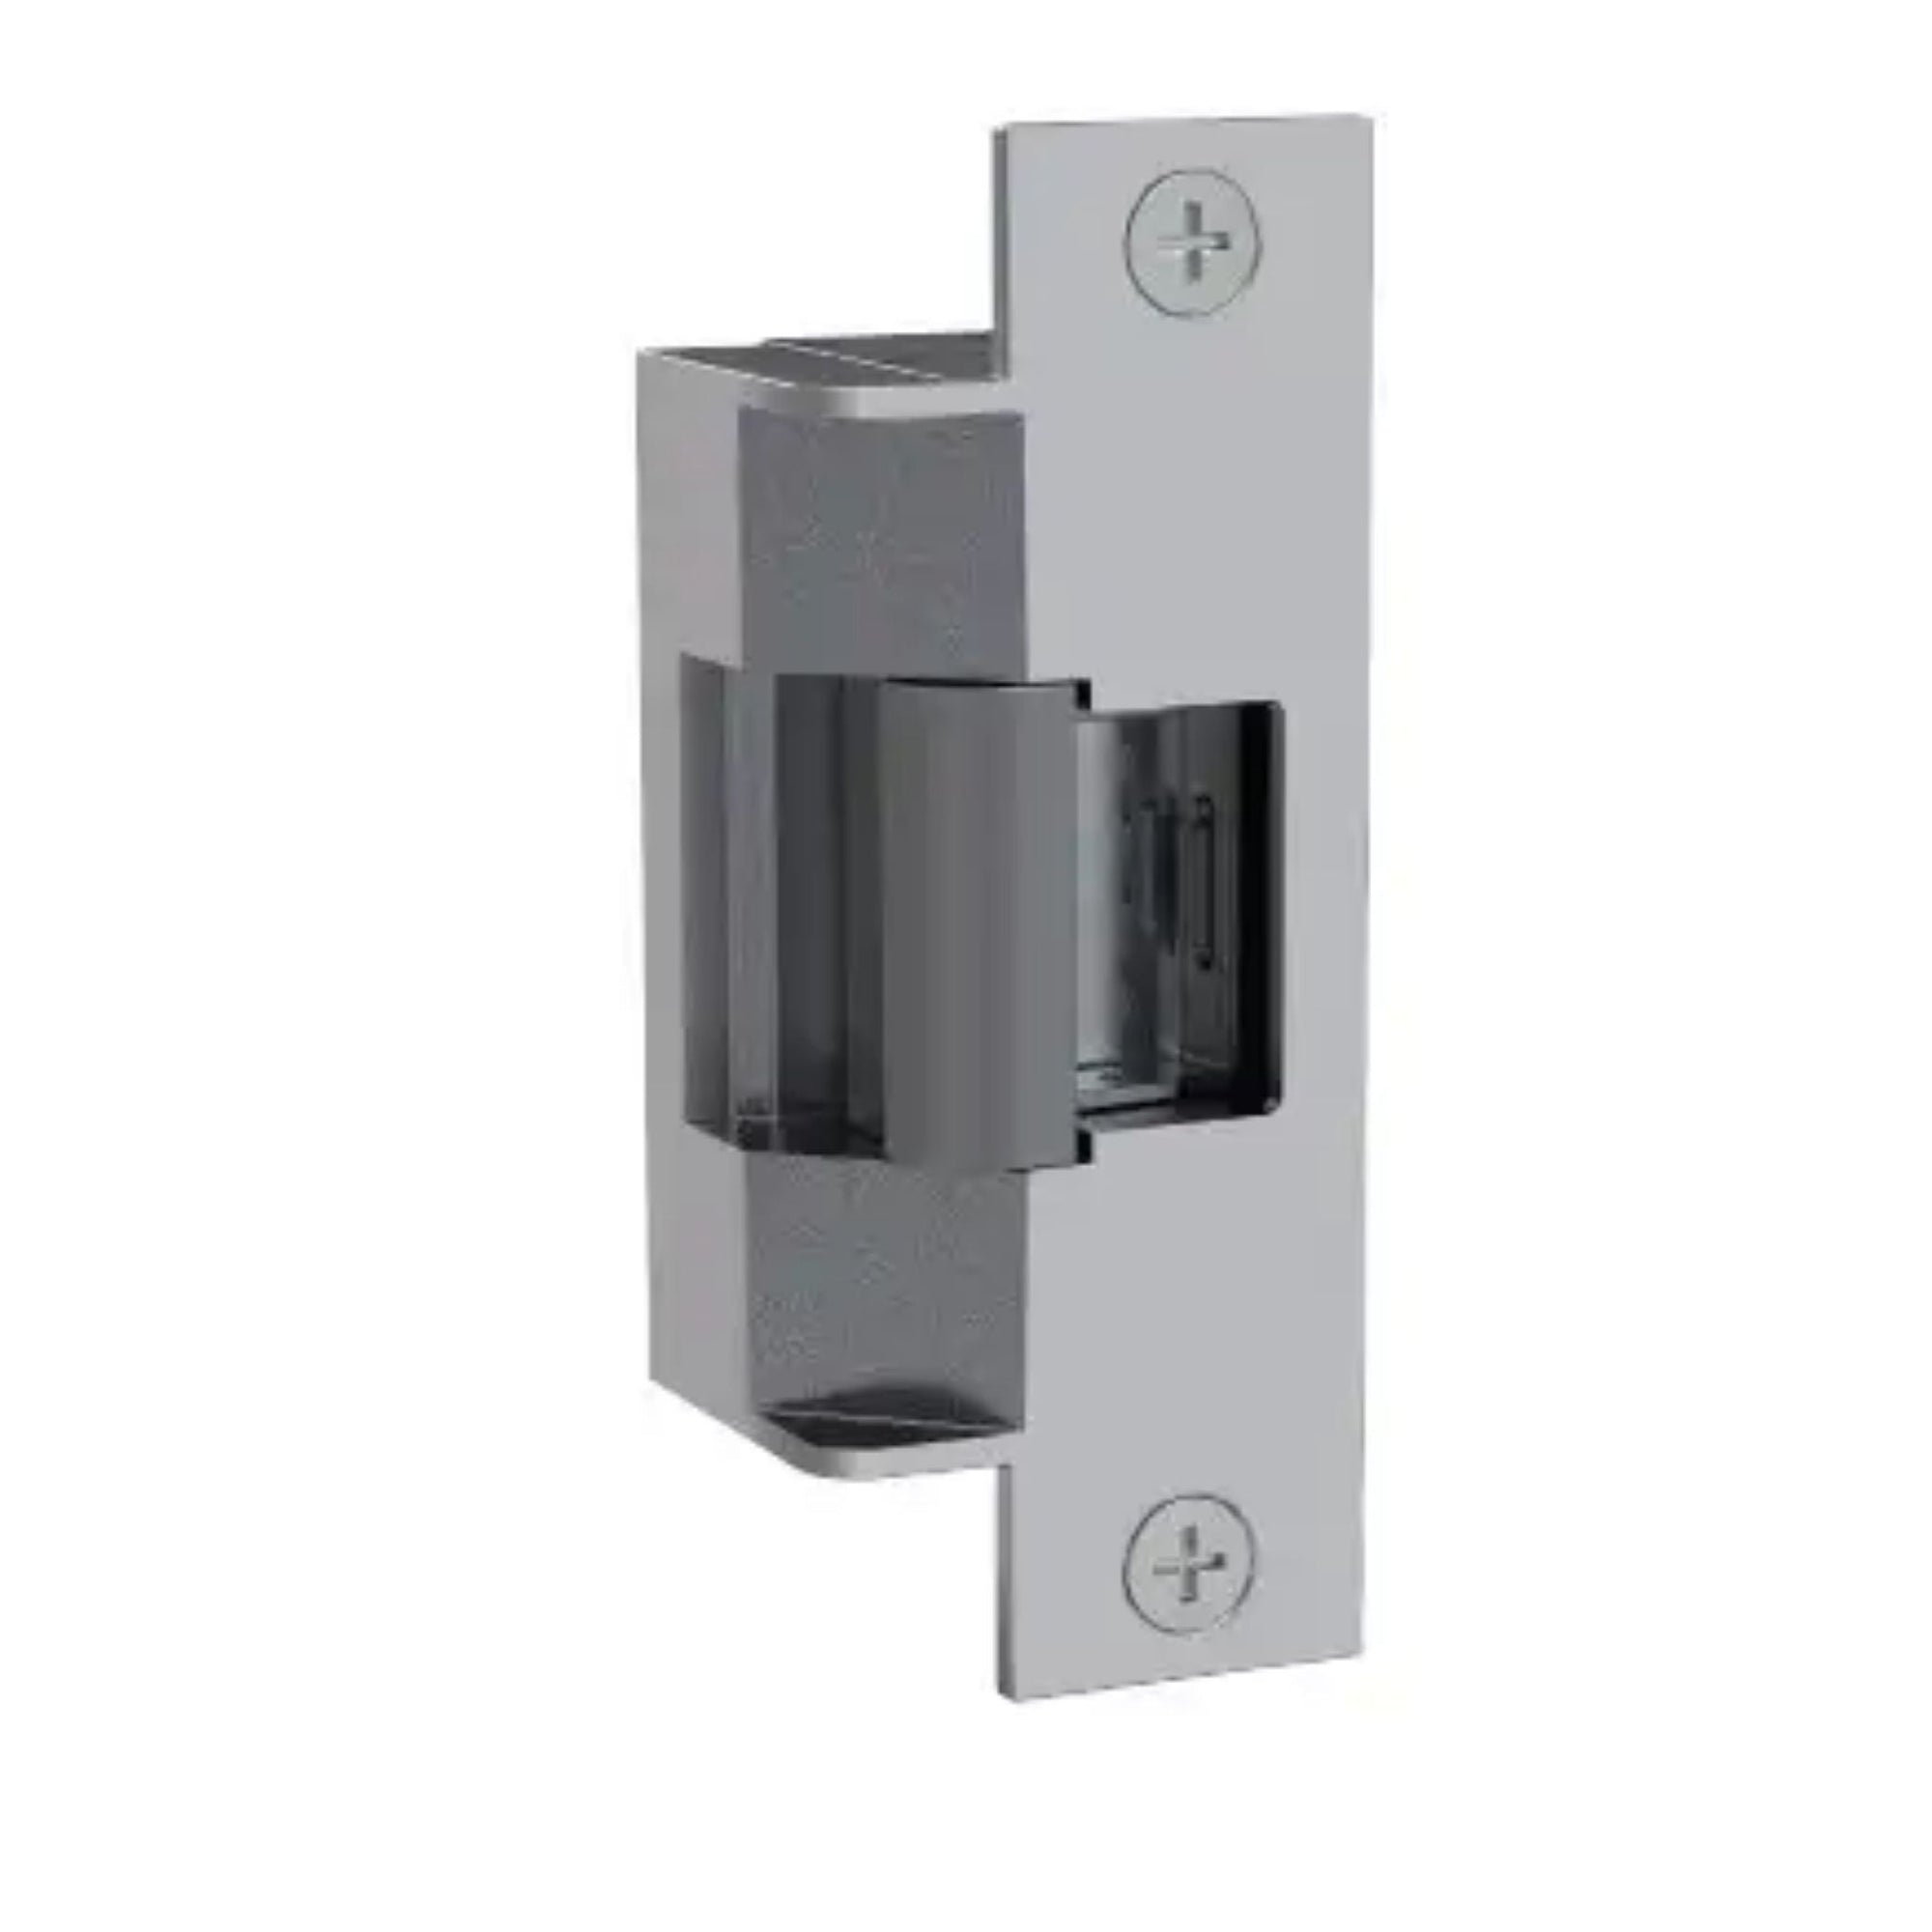 HES 7501-630 Fire Rated Electric Strikes for Doors With Pre Loaded Conditions Satin Stainless Steel Finish Strikes Available with Latchbolt Monitor (LBM) Feature - The Lock Source